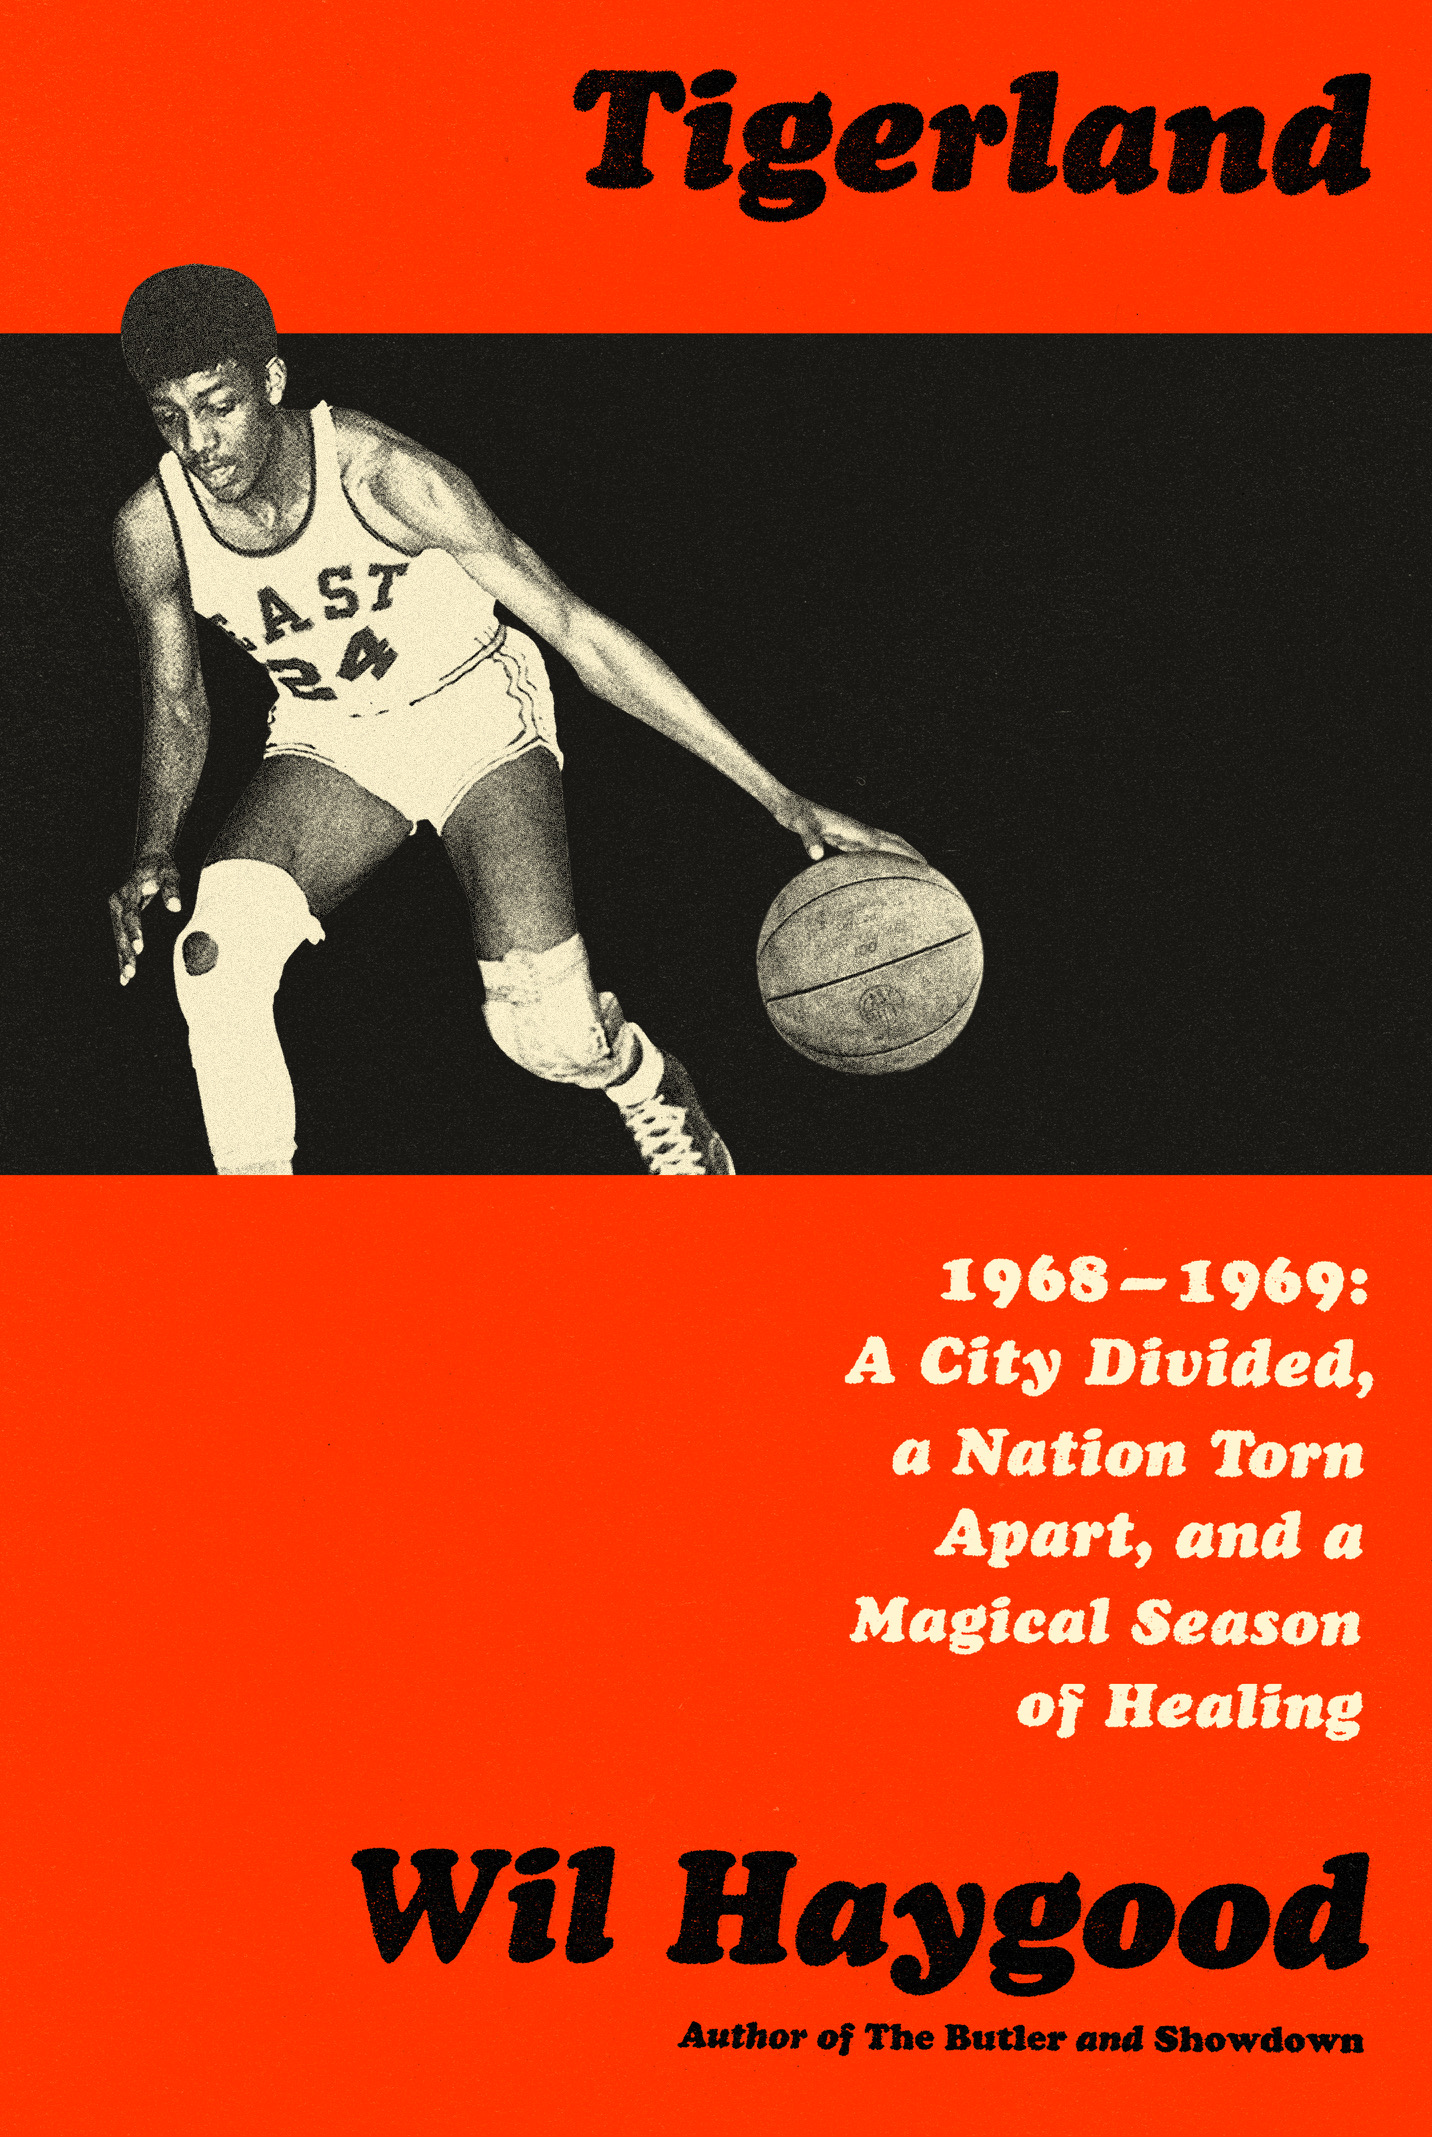 Tigerland book jacket, with vintage photo of basketball player, book title, author name